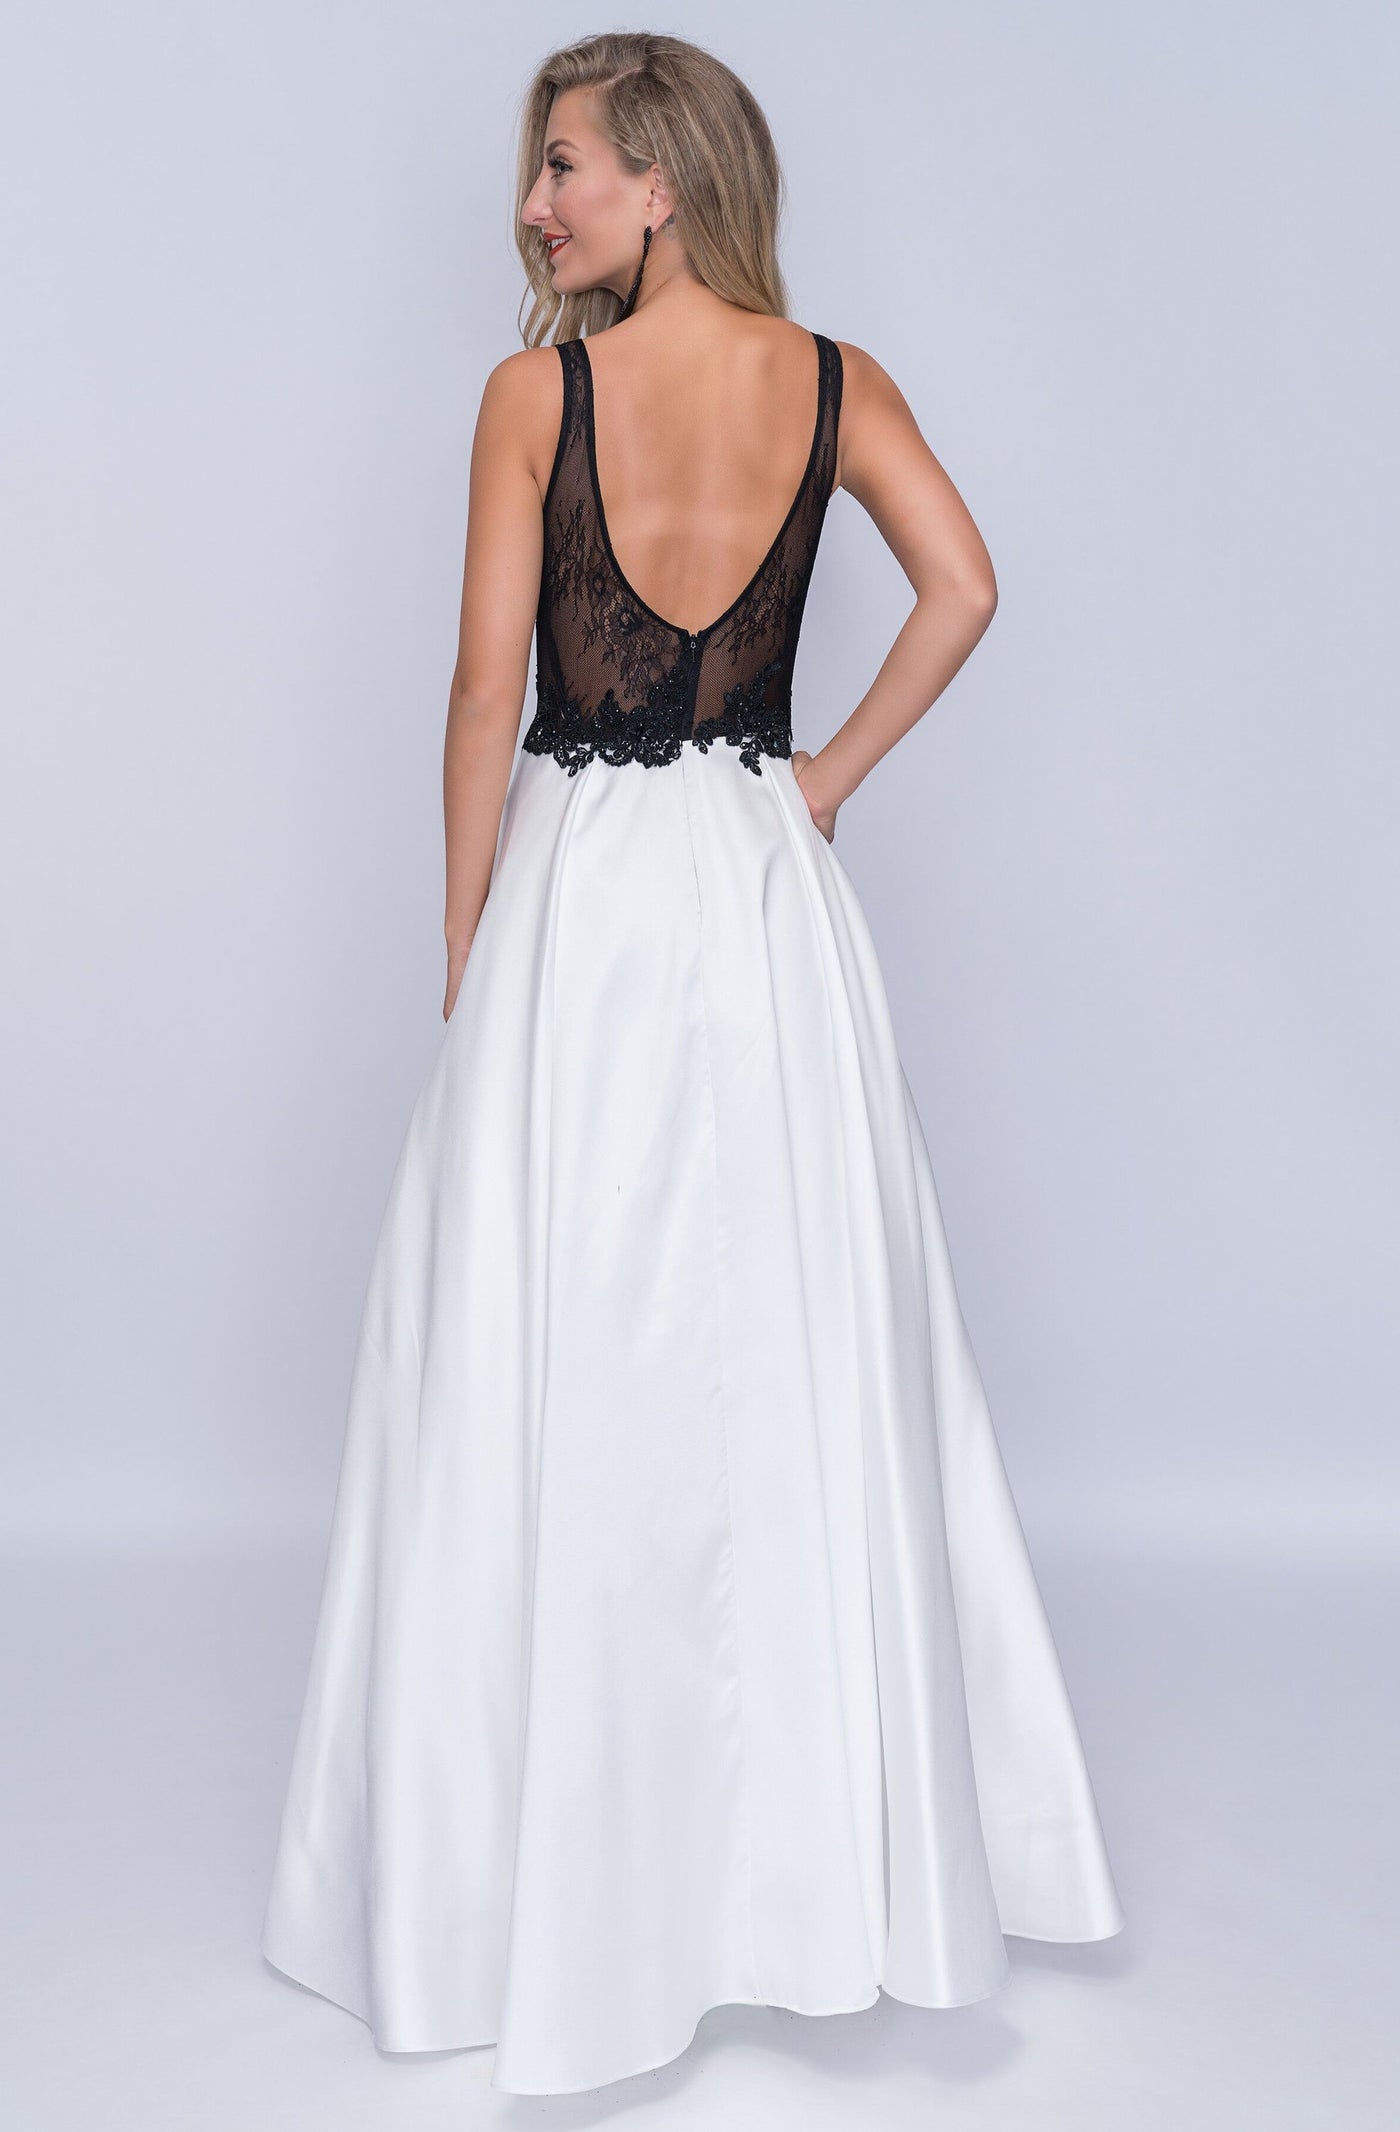 Nina Canacci - 3145 Embellished Lace V-neck A-line Dress in White and Black